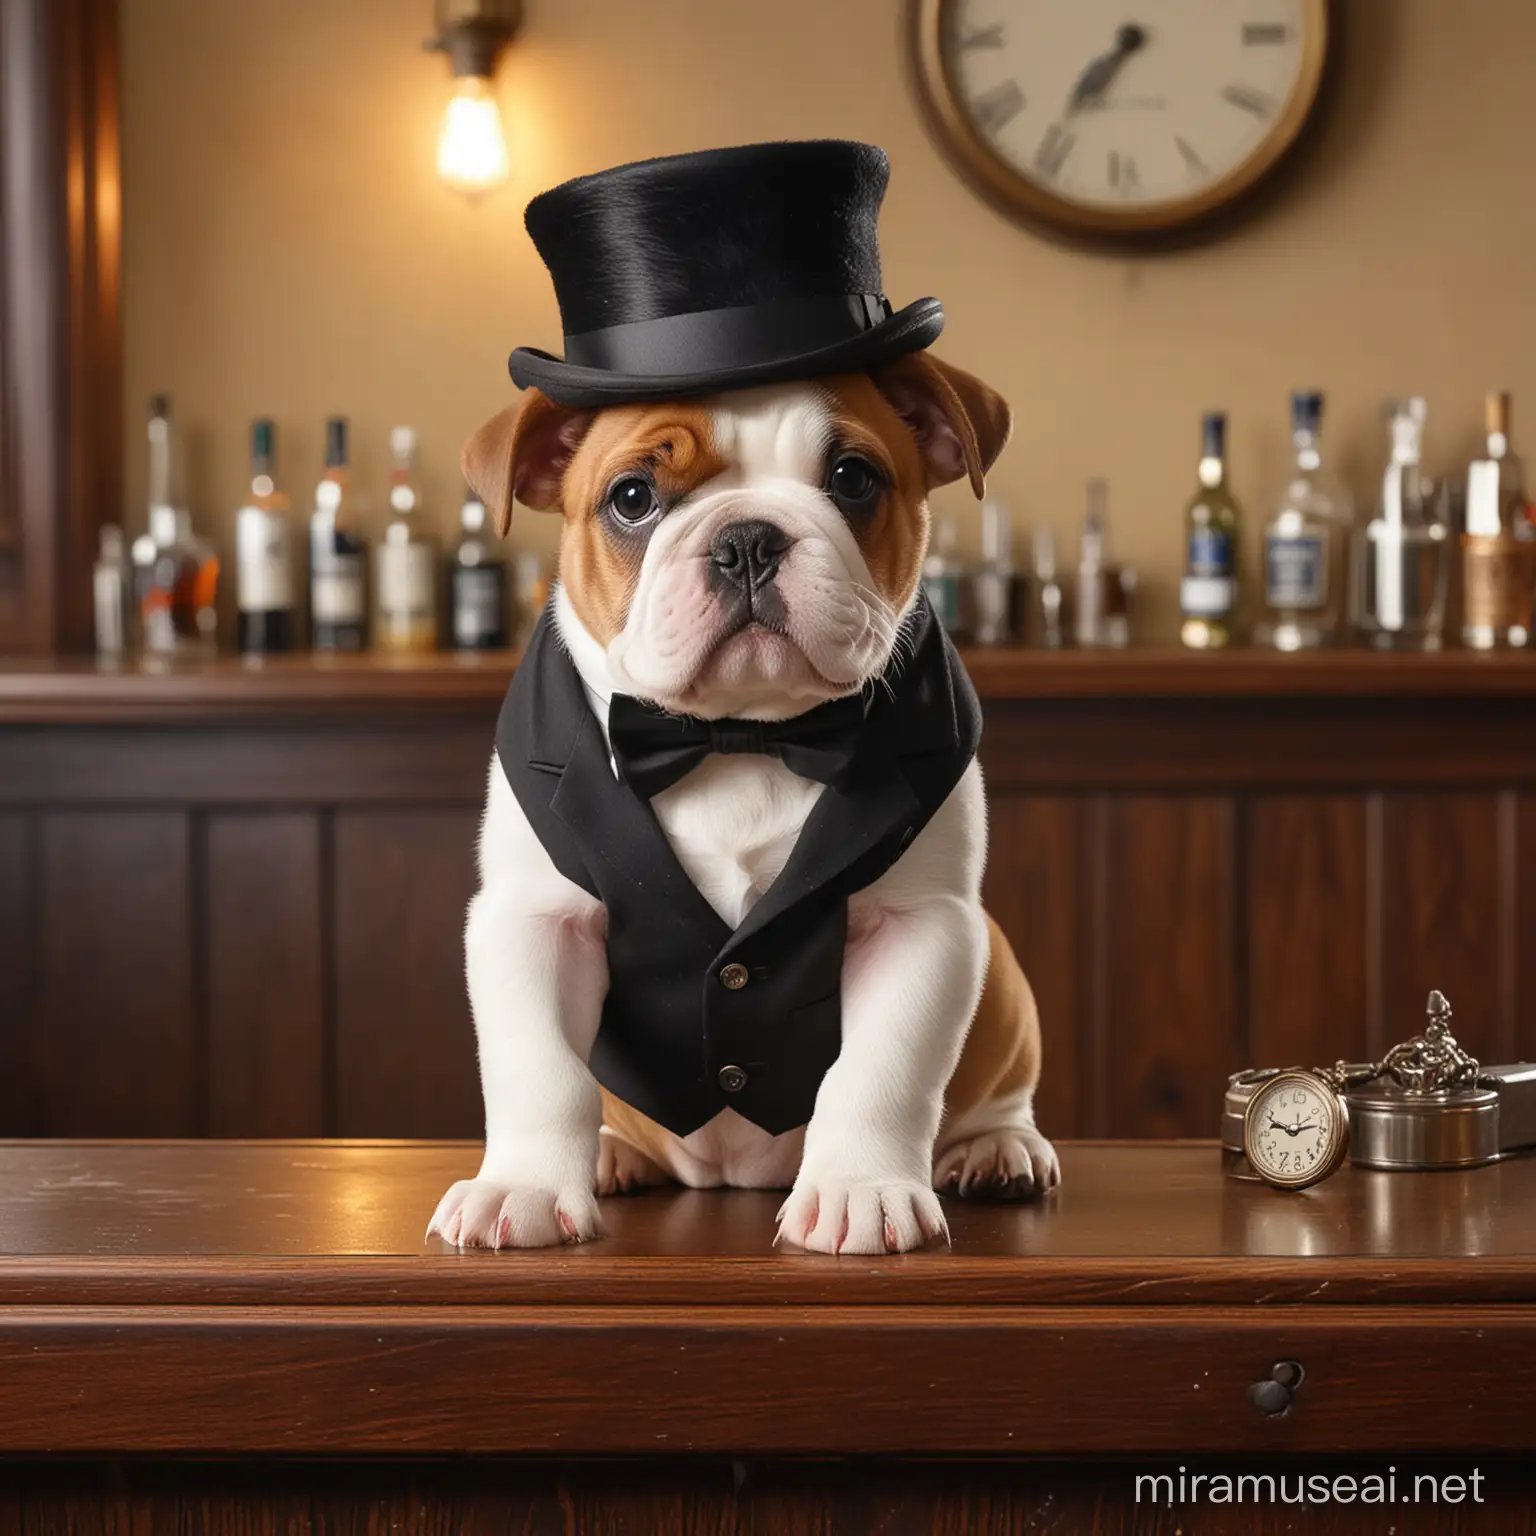 Adorable Bulldog Puppy with Top Hat and Pocket Watch on Bar Counter